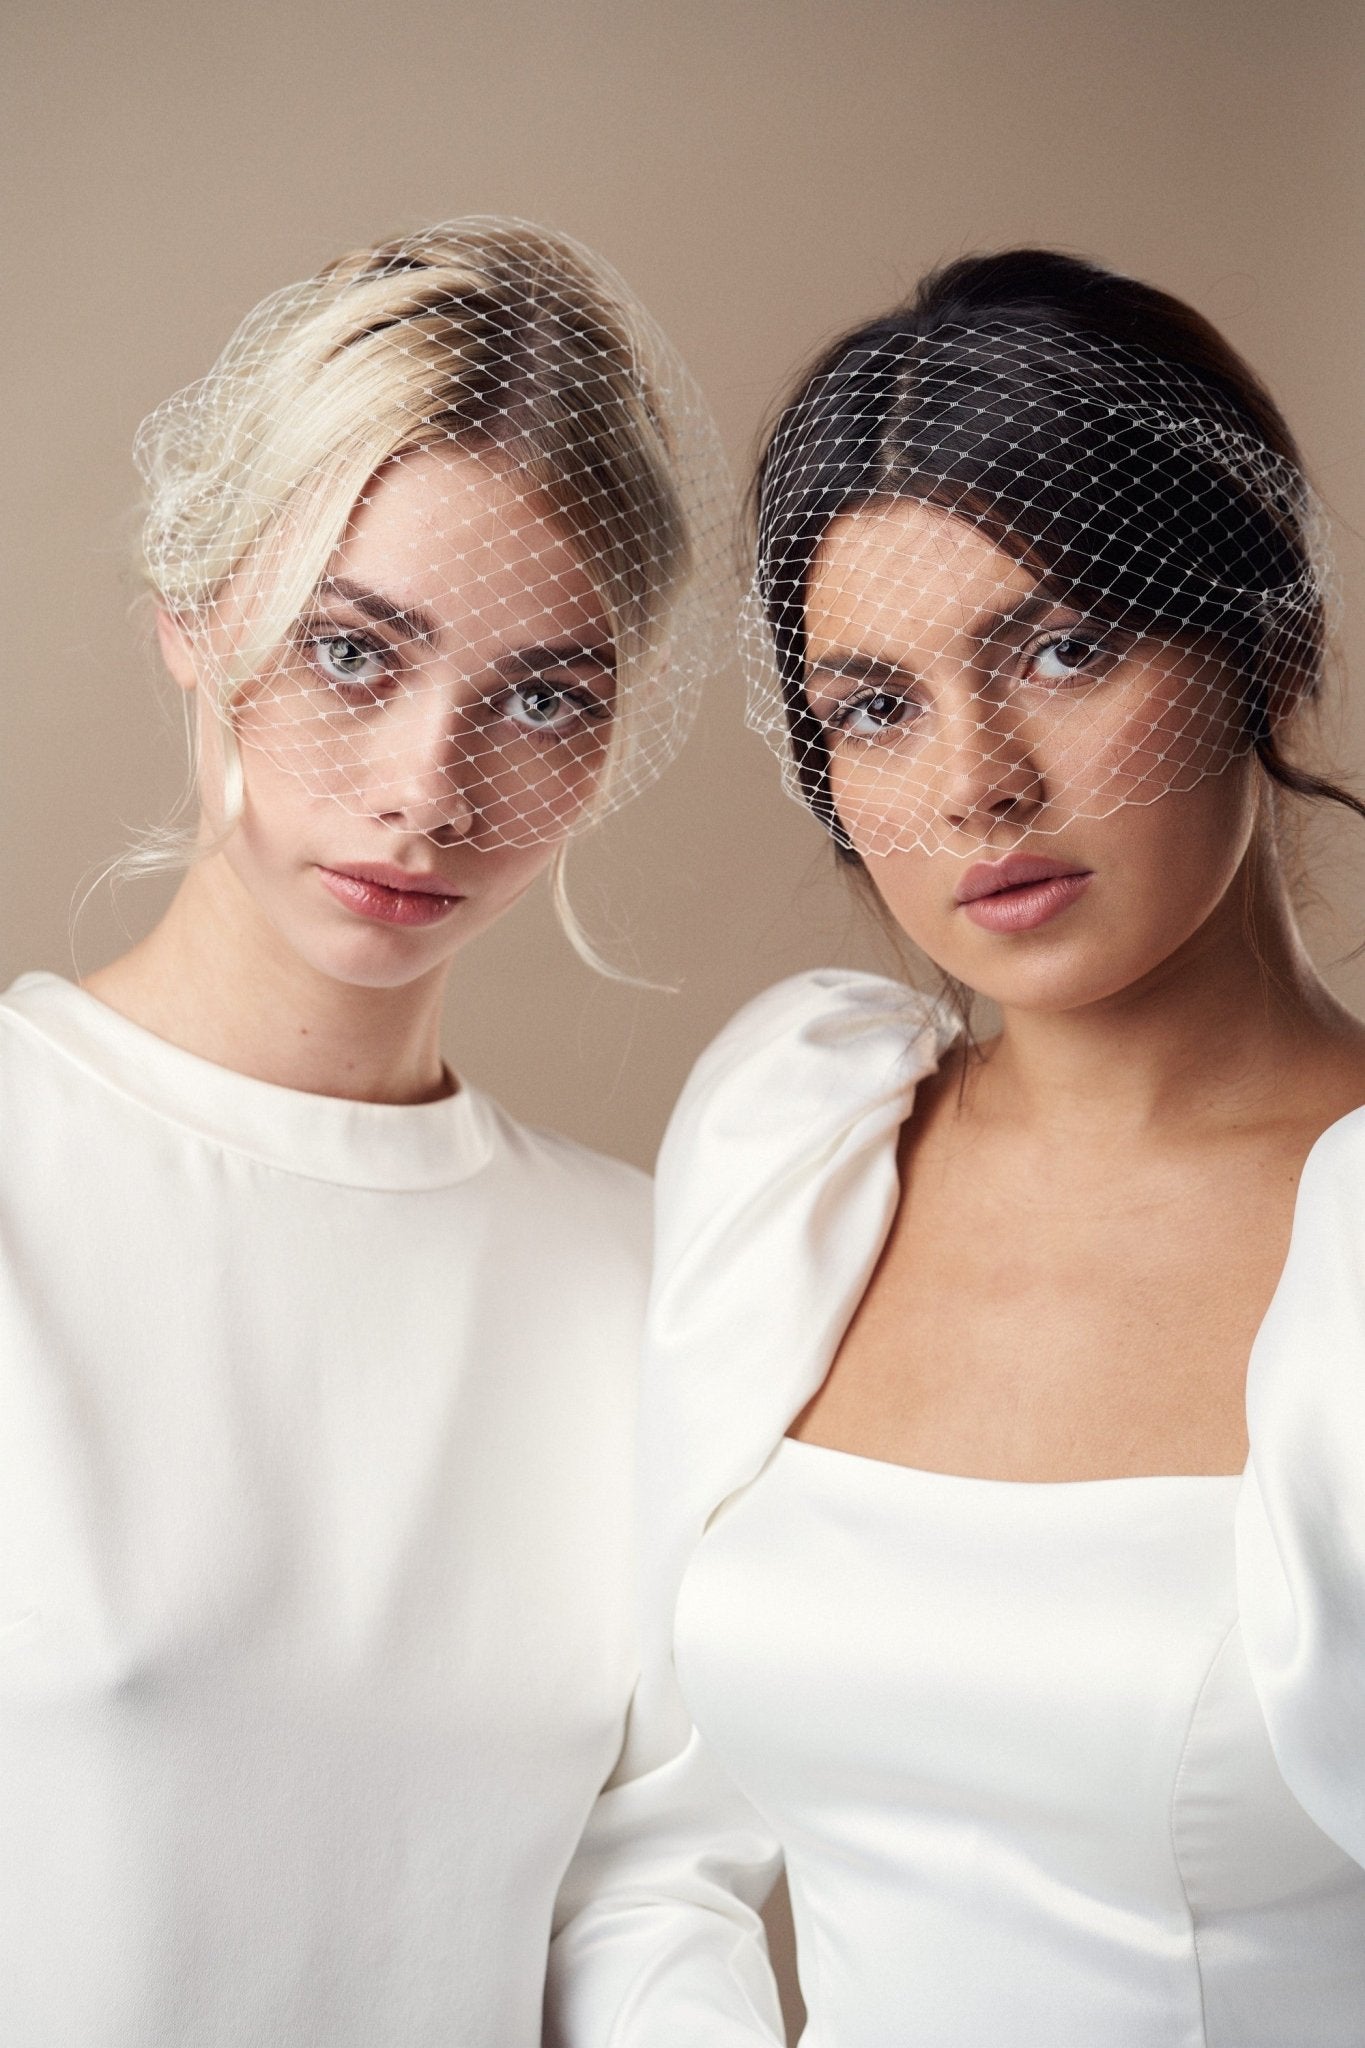 Ivory birdcage wedding veil - mask style - long (left) and short options pictured together